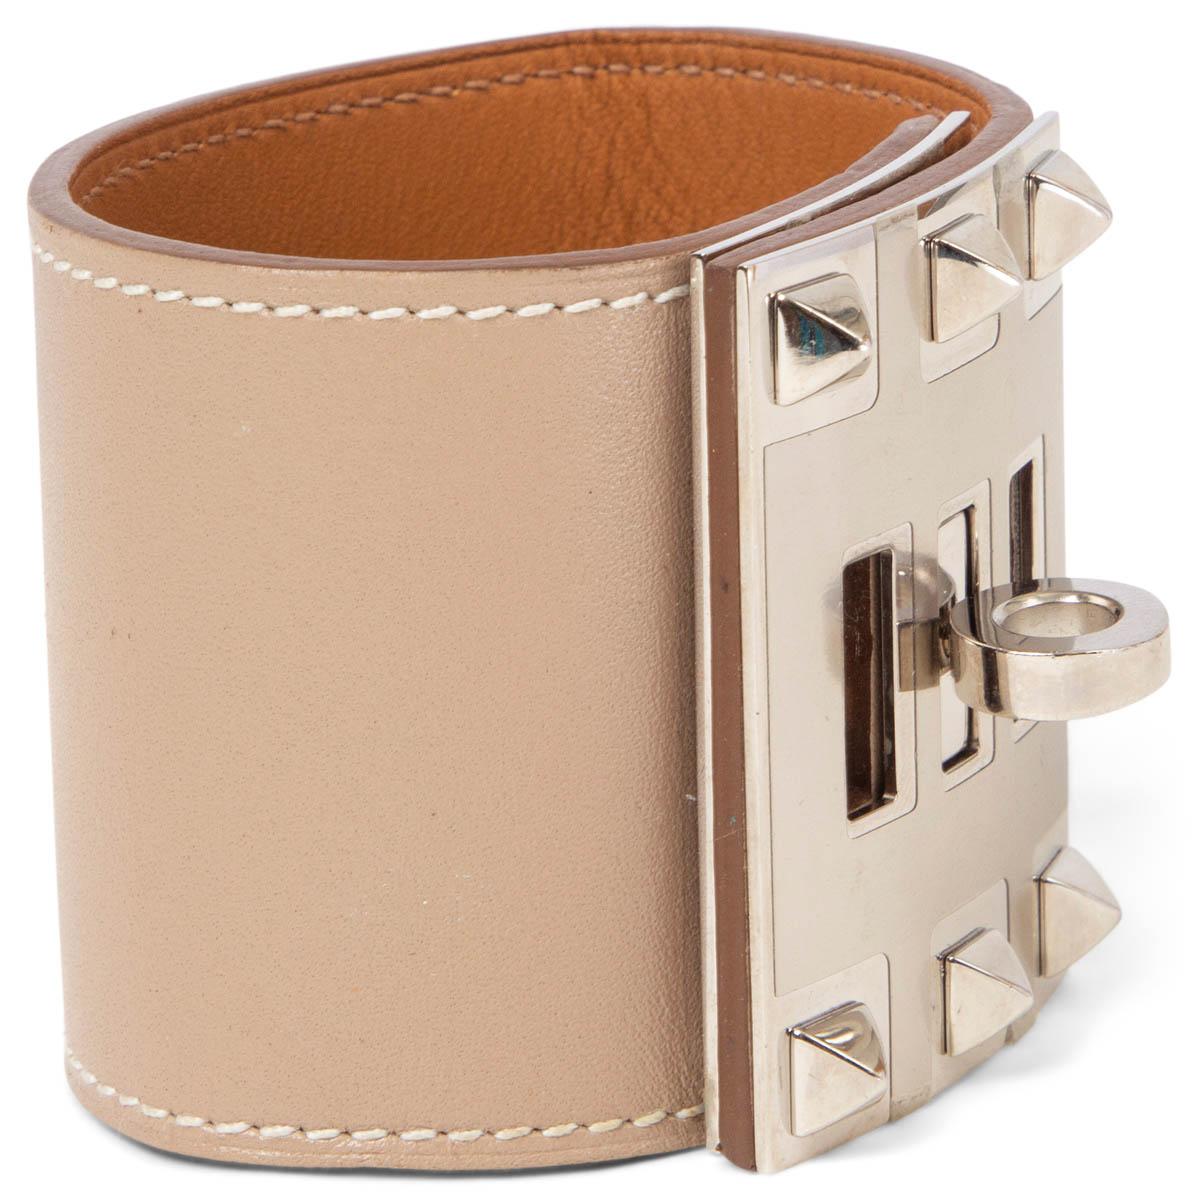 100% authentic Hermès Kelly Dog Extreme cuff bracelet in beige Argile Box leather featuring Palladium hardware. Has been worn and shows some faint scratches on the leather. Hardware still has protection sticker on. Overall in excellent condition.